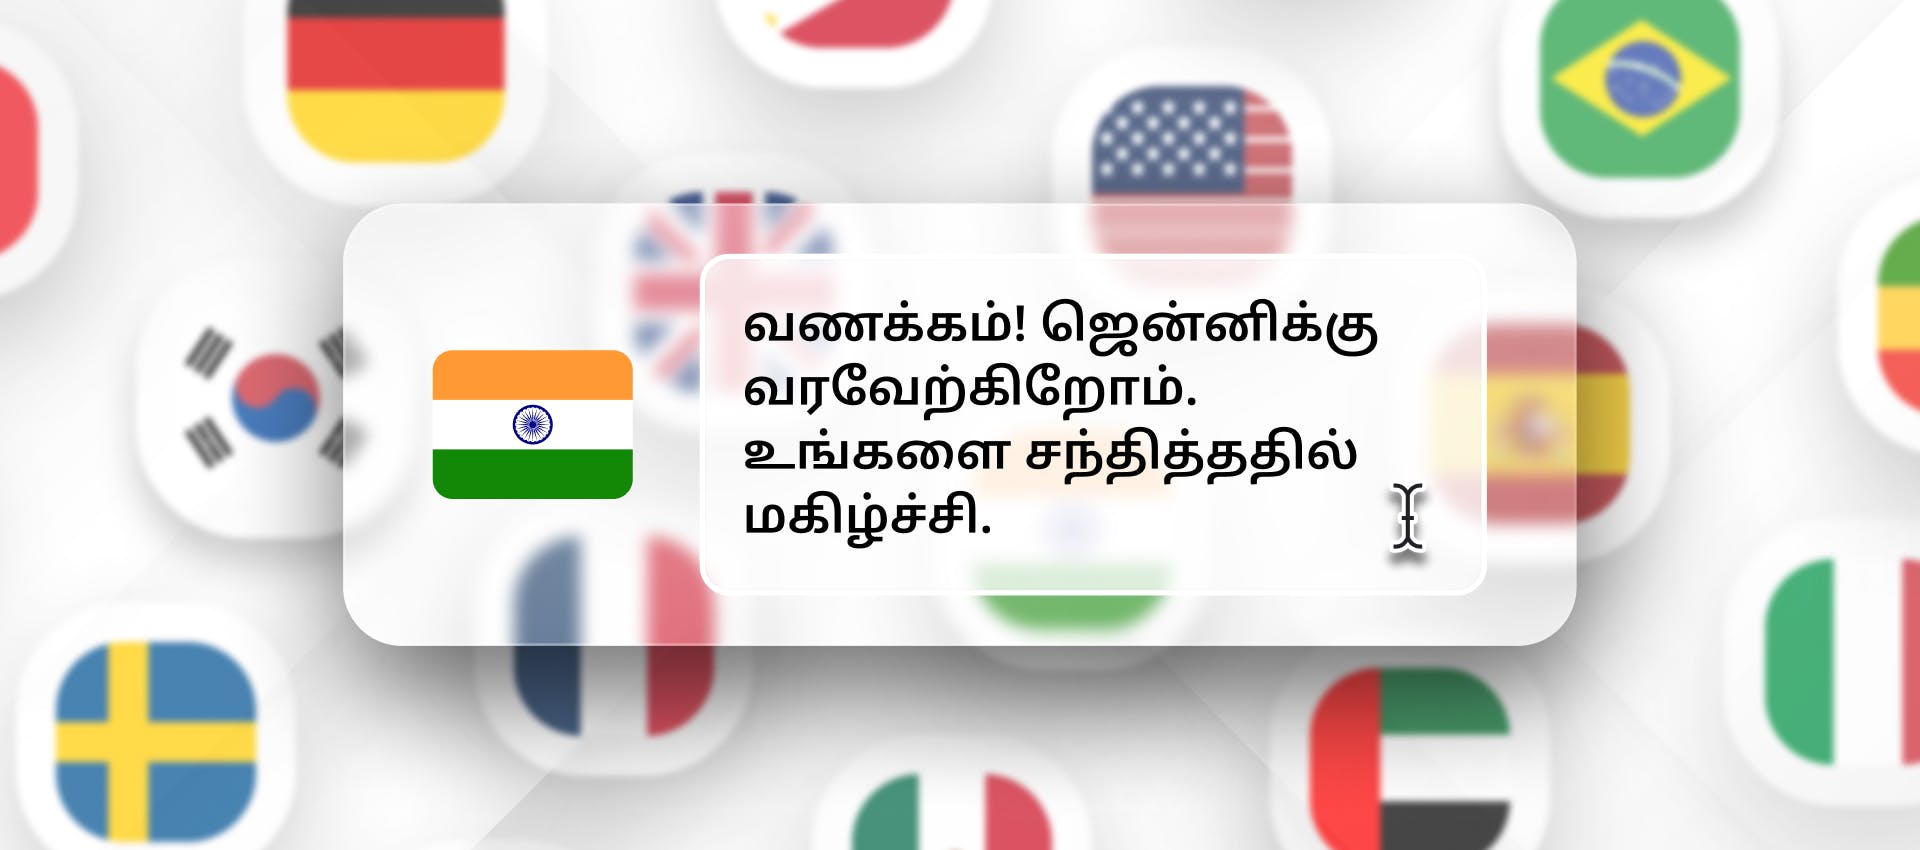 Tamil phrase for TTS generation with different flags in the background